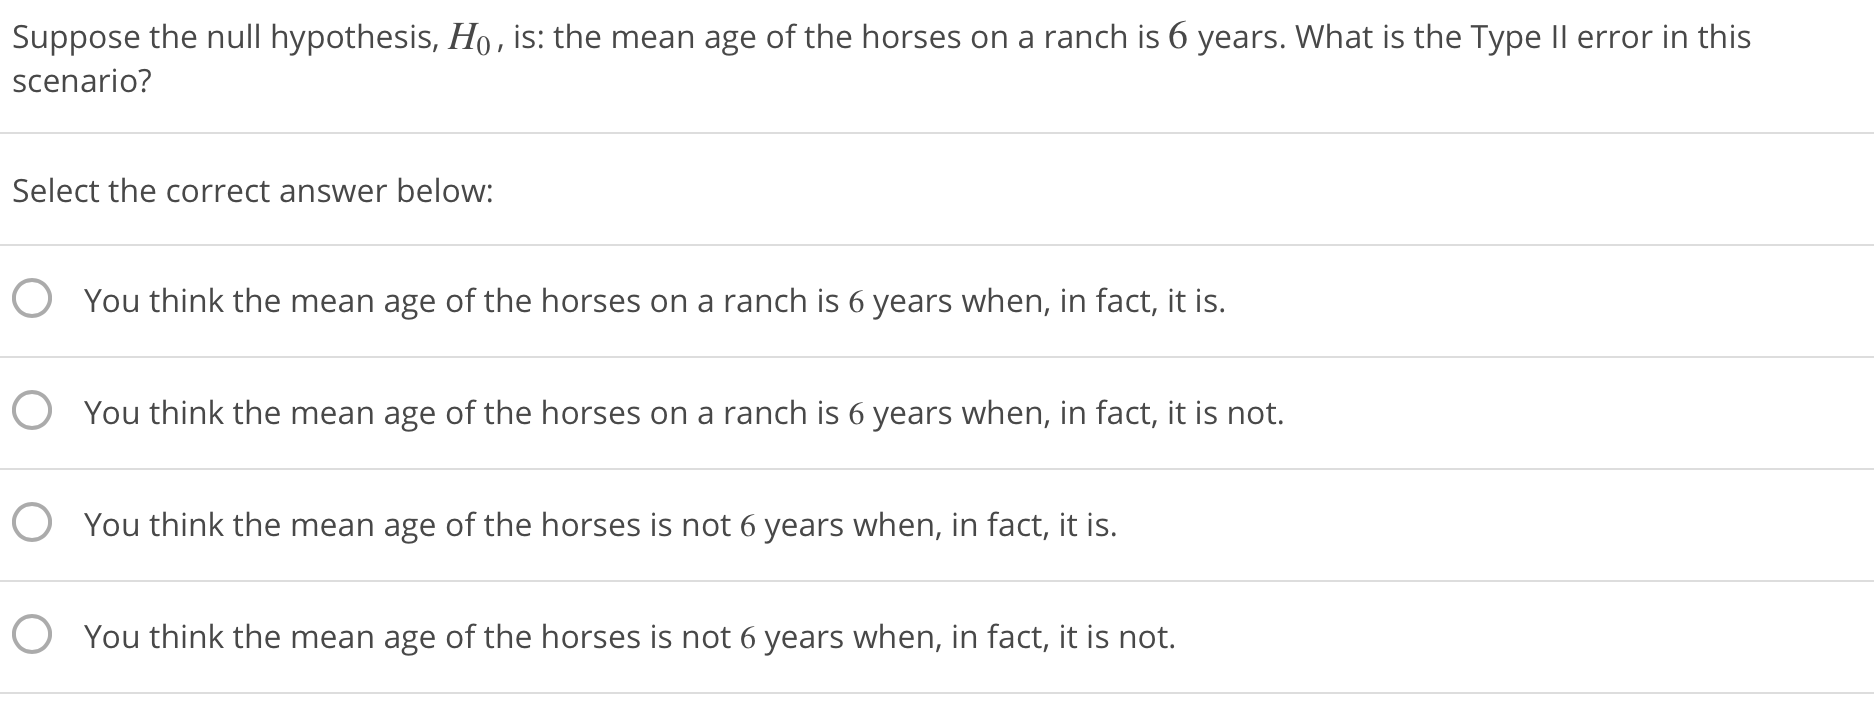 Suppose the null hypothesis, Ho, is: the mean age of the horses on a ranch is 6 years. What is the Type lI error in this
scenario?
Select the correct answer below:
O
O
O
O
You think the mean age of the horses on a ranch is 6 years when, in fact, it is.
You think the mean age of the horses on a ranch is 6 years when, in fact, it is not.
You think the mean age of the horses is not 6 years when, in fact, it is.
You think the mean age of the horses is not 6 years when, in fact, it is not.
